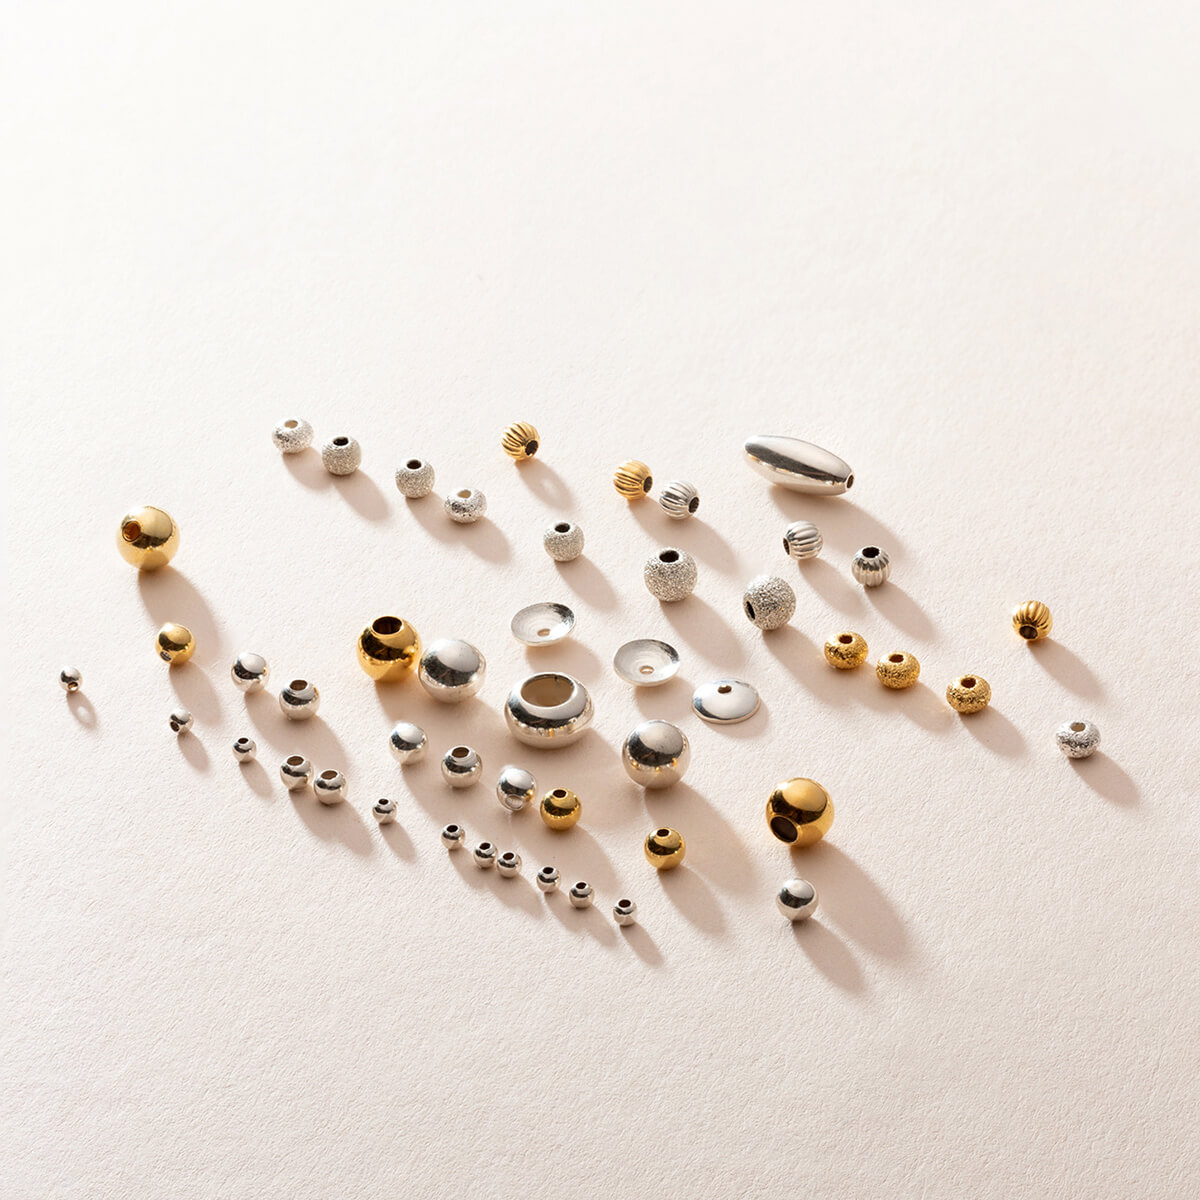 What Are Spacer Beads and How Can You Use Them? – The Bead Traders